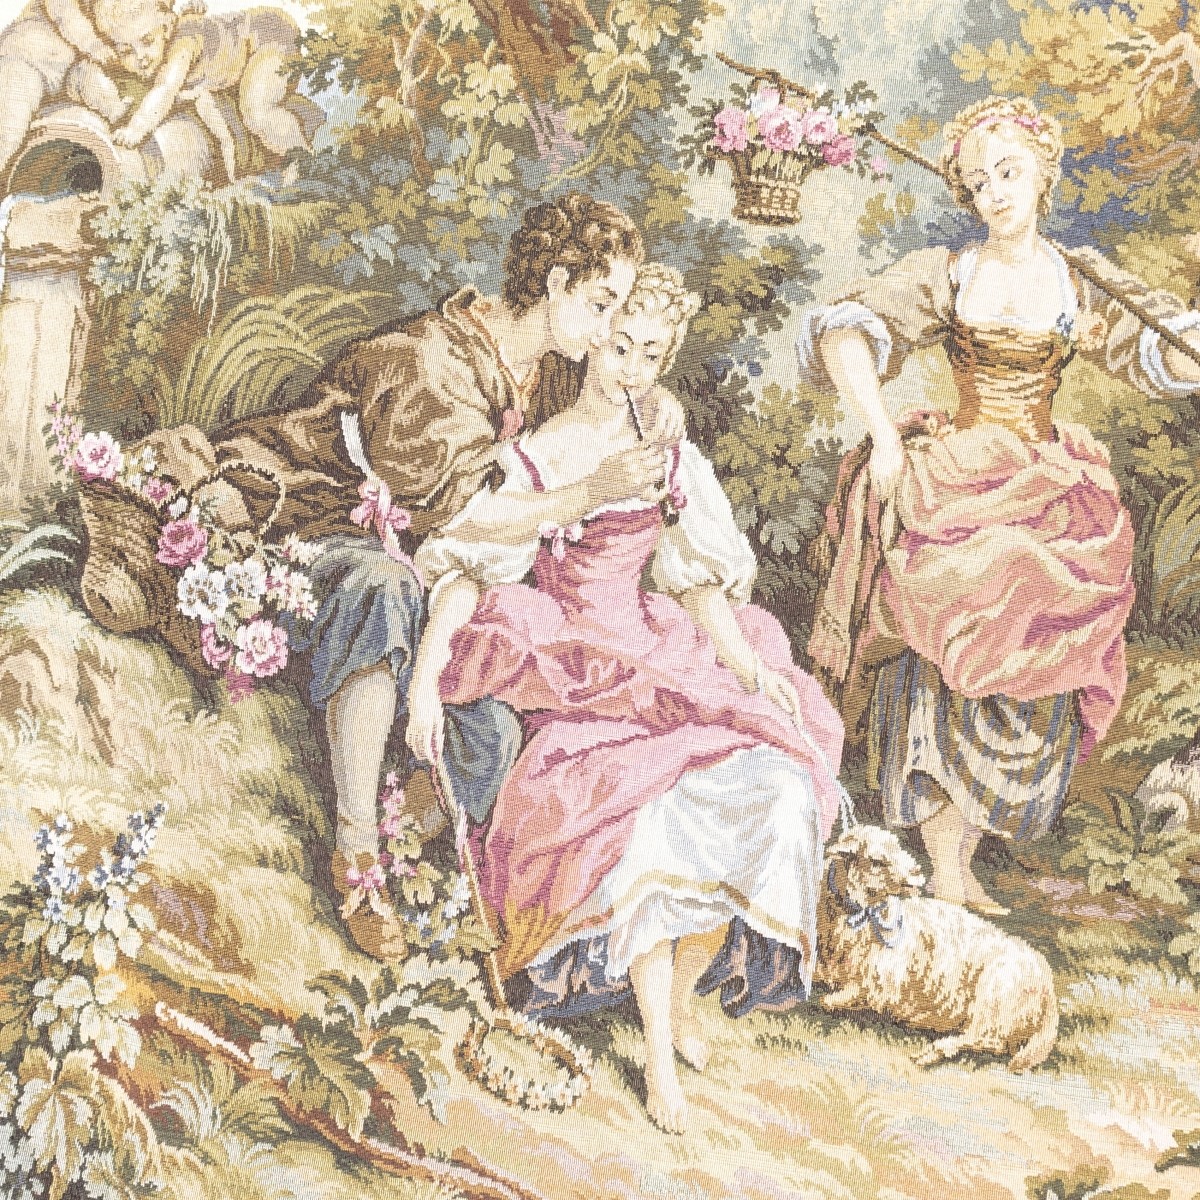 Modern Aubusson Style Tapestry